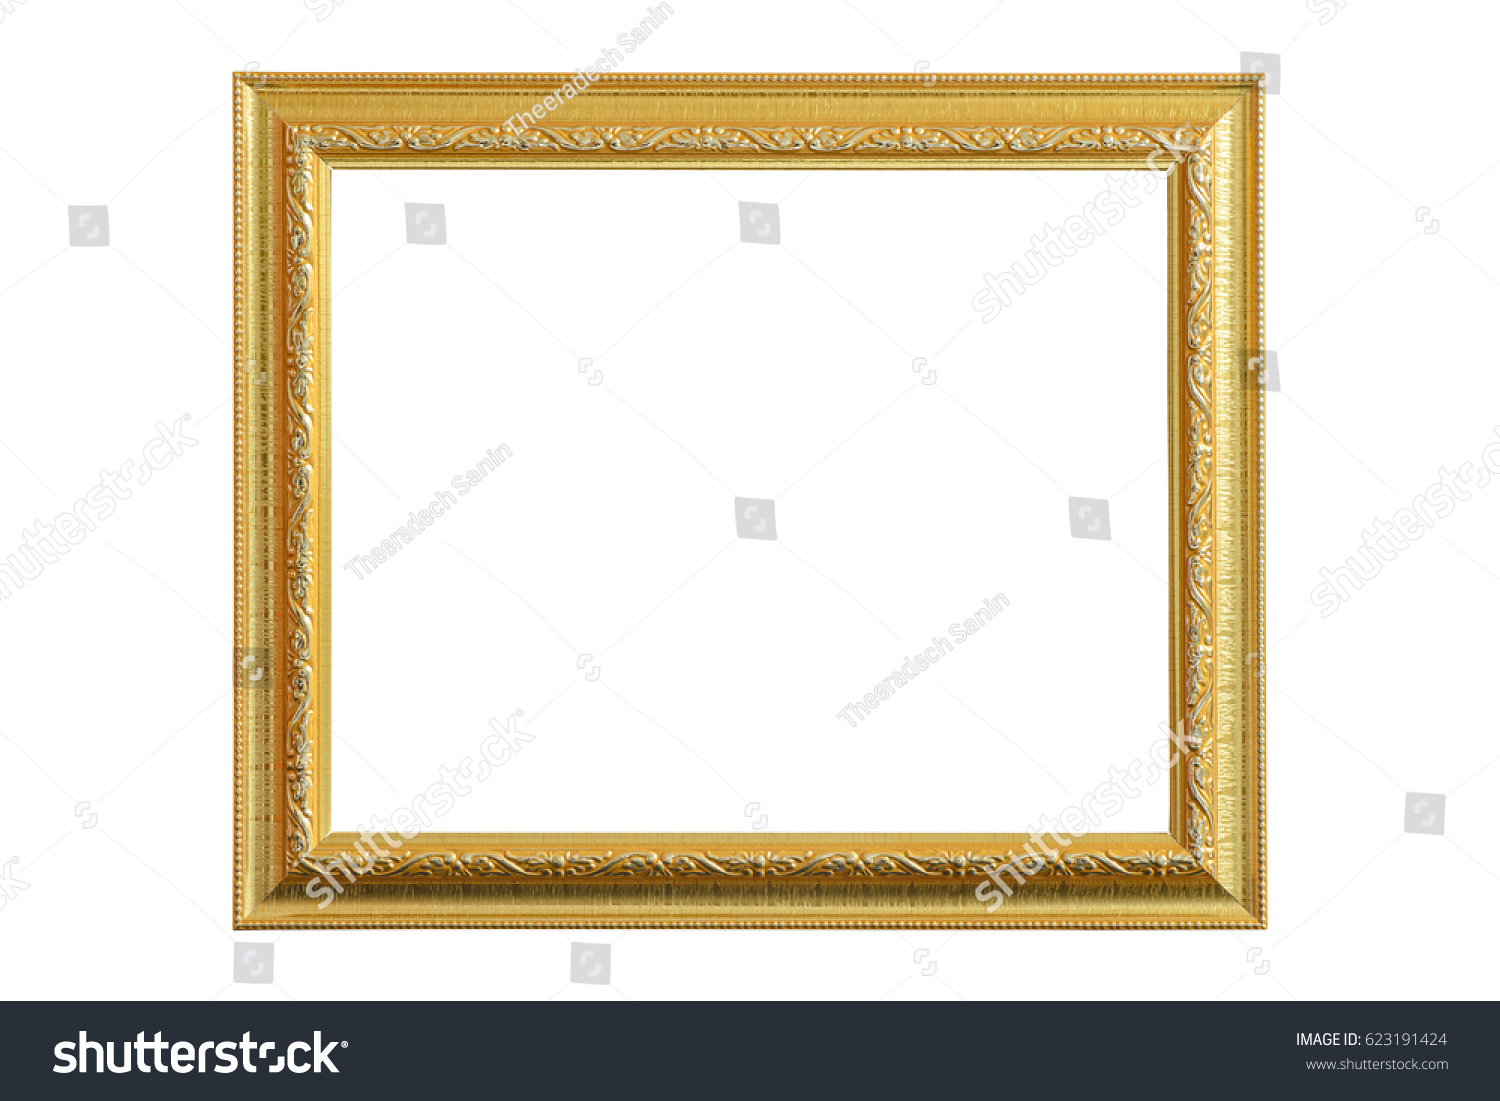 Gold picture frame on white background. #623191424